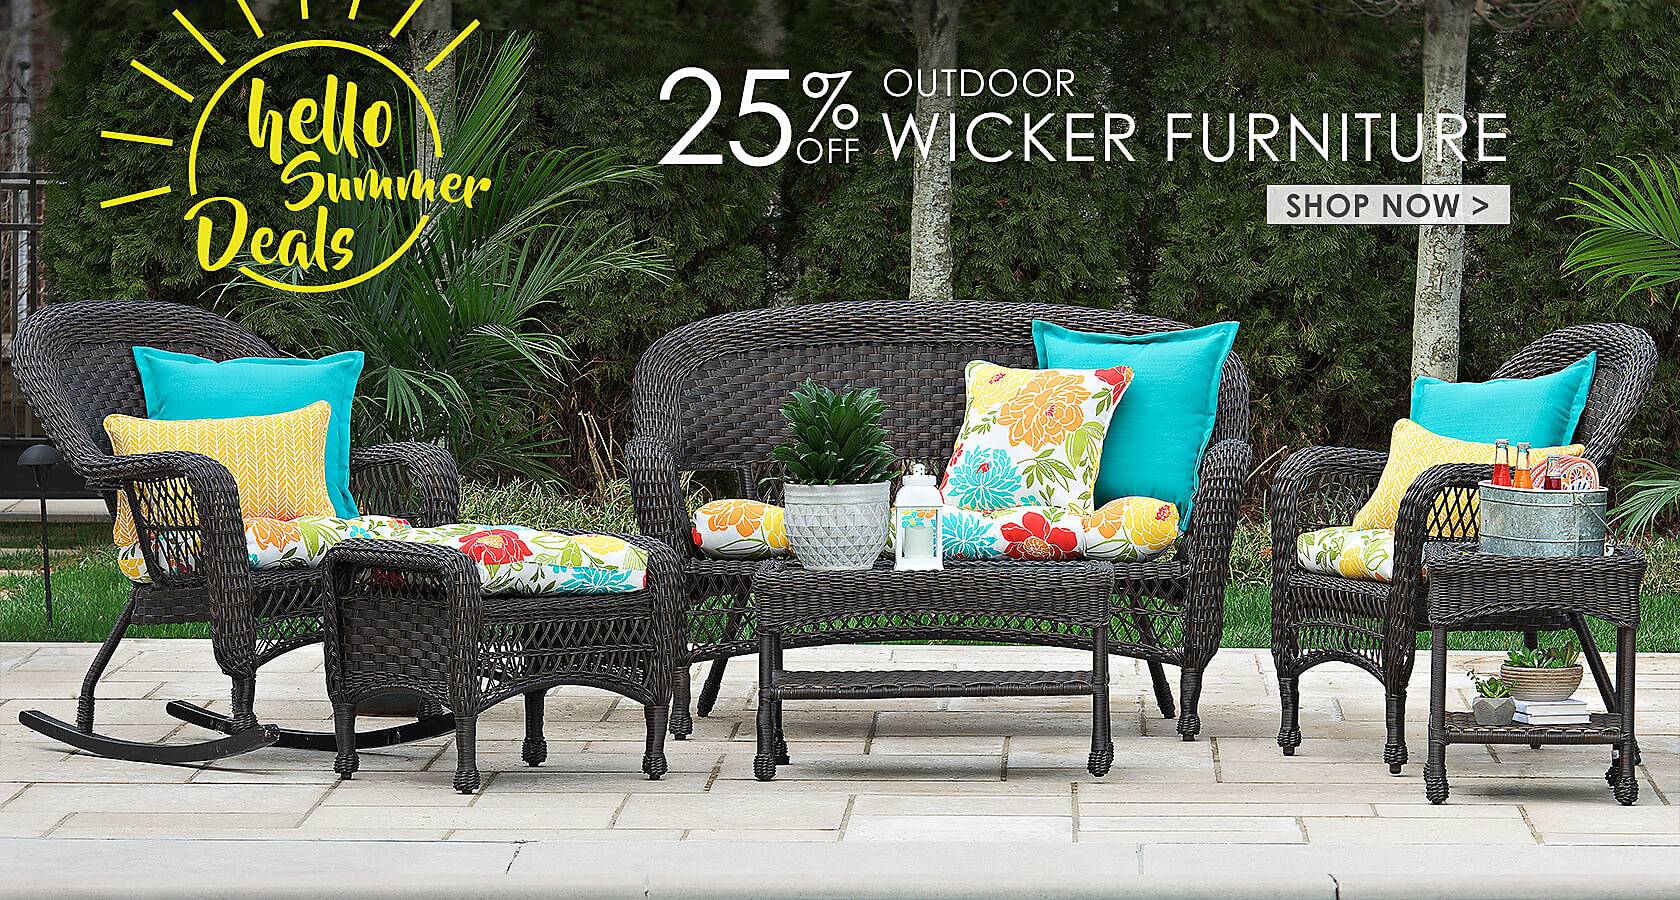 Hello to Summer - 25% Off Outdoor Wicker Furniture - Shop Now